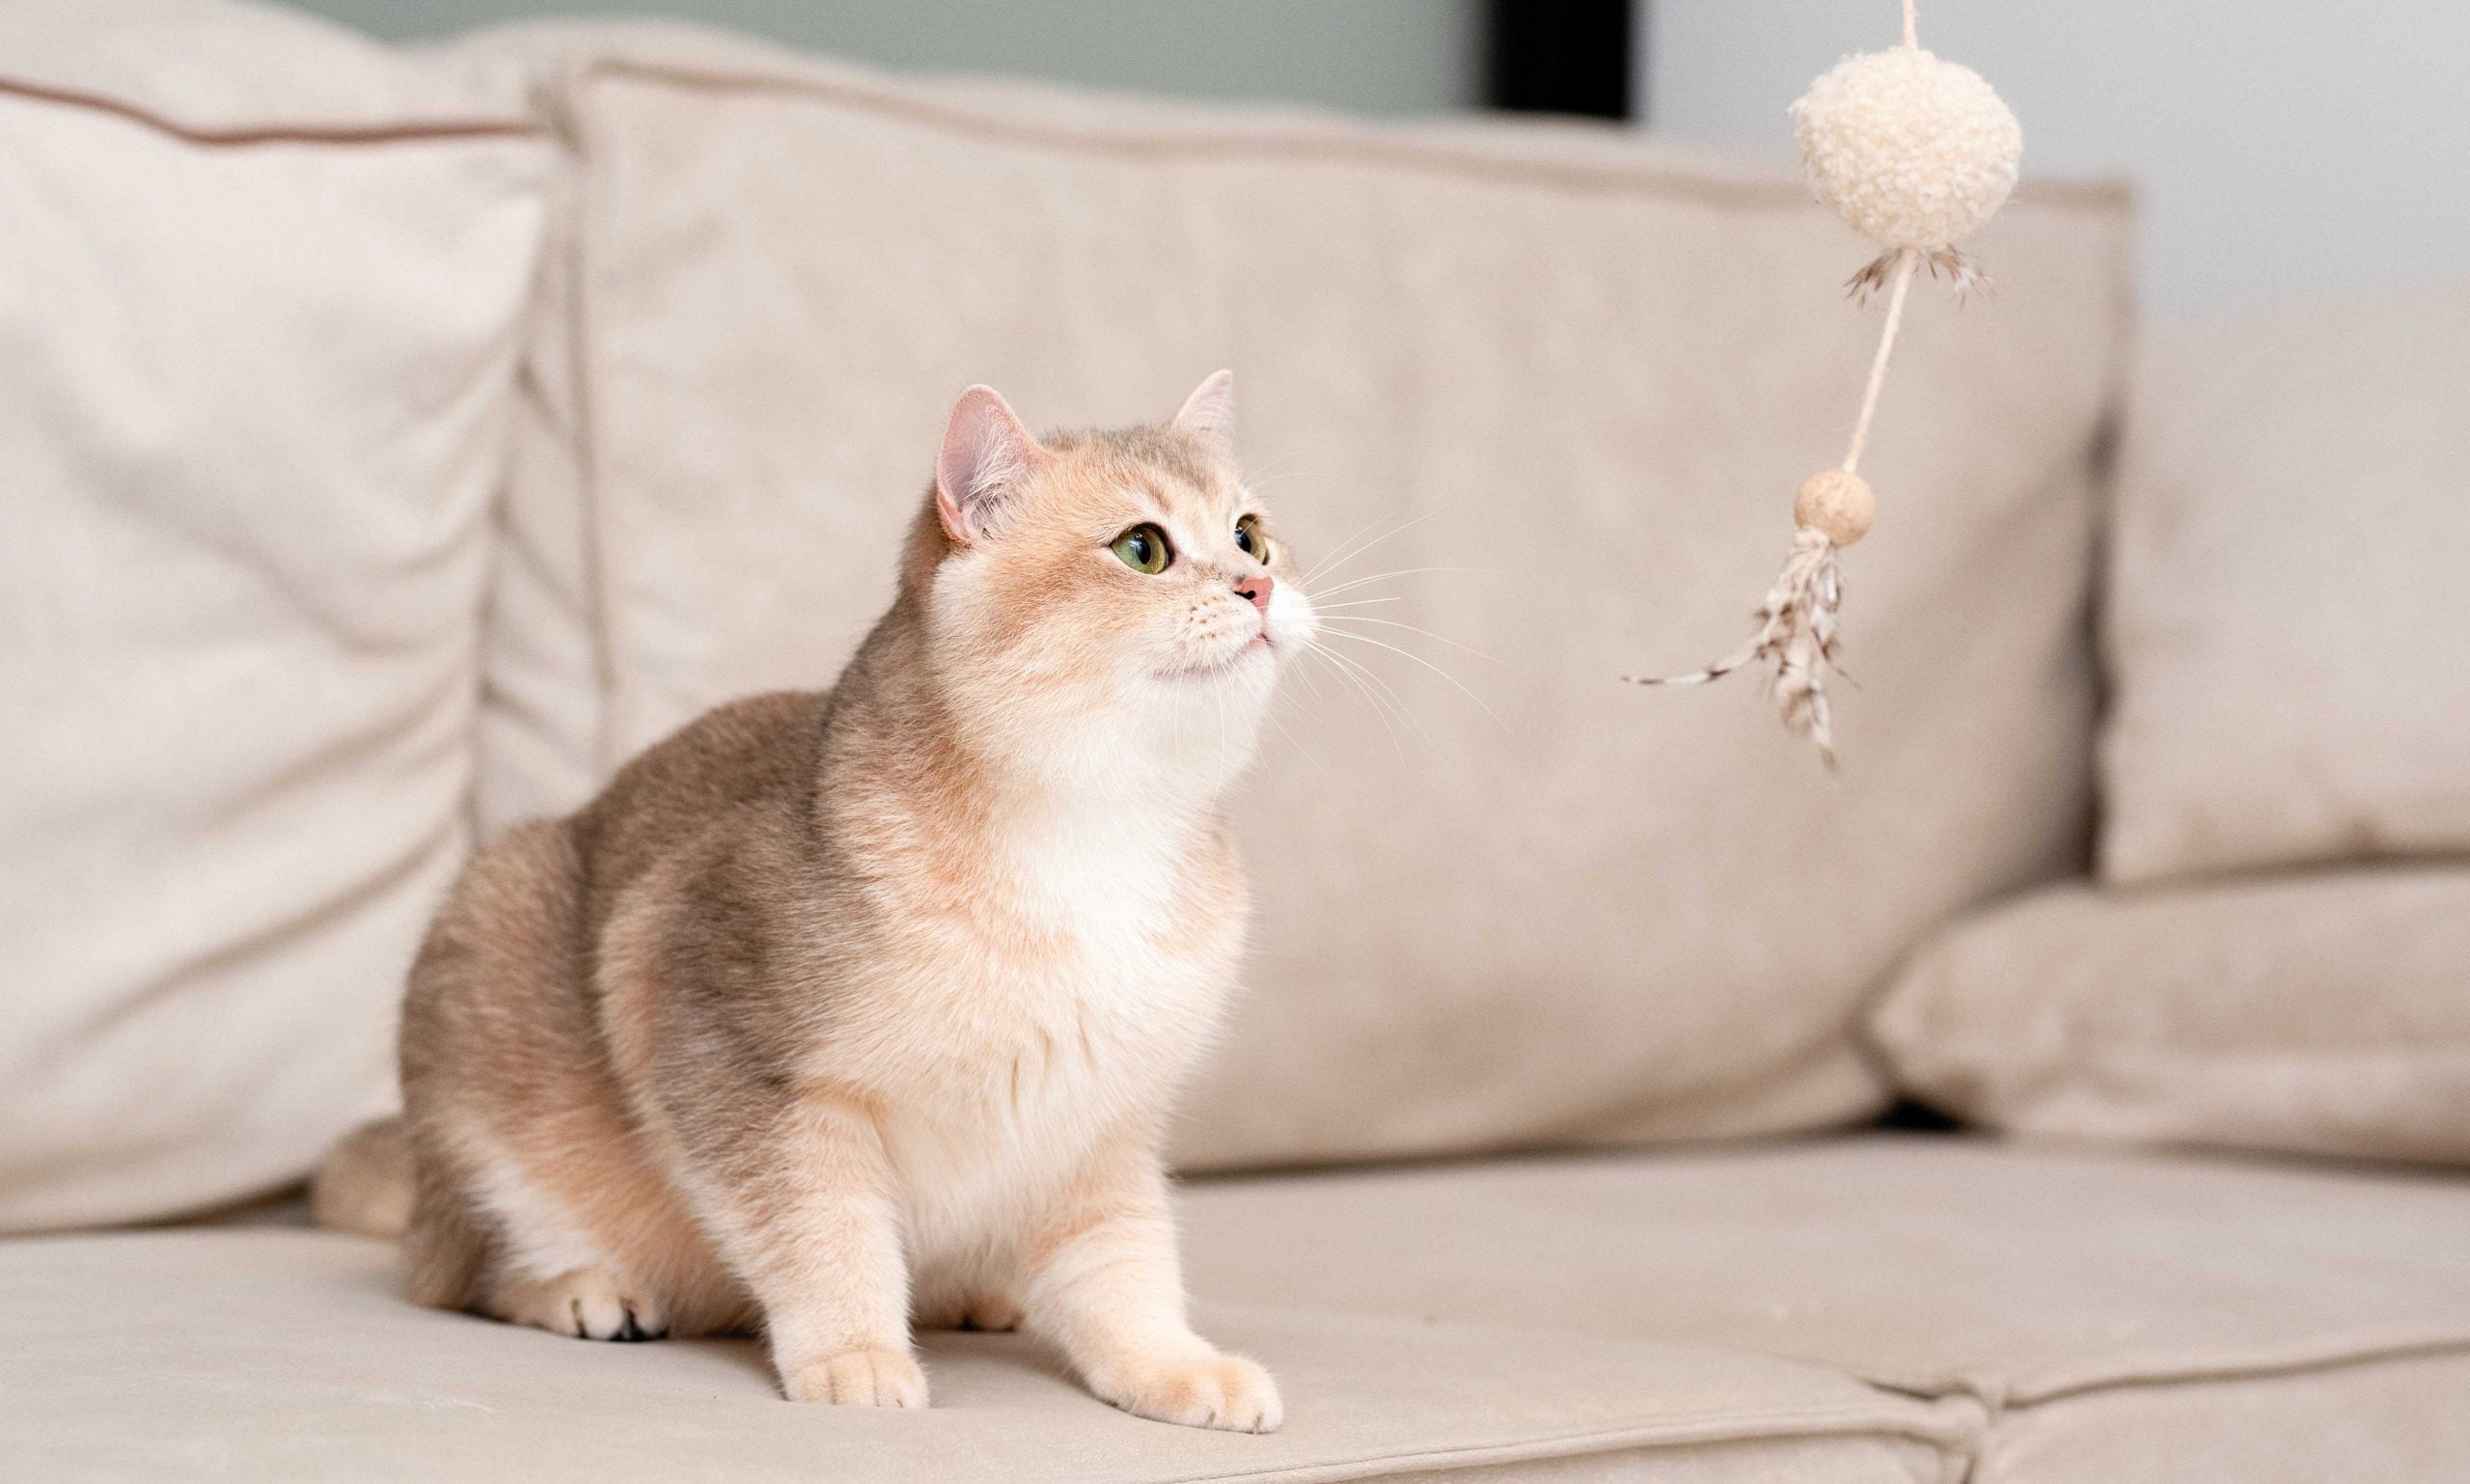 how to calm down kitten: cat playing with wand toy on couch